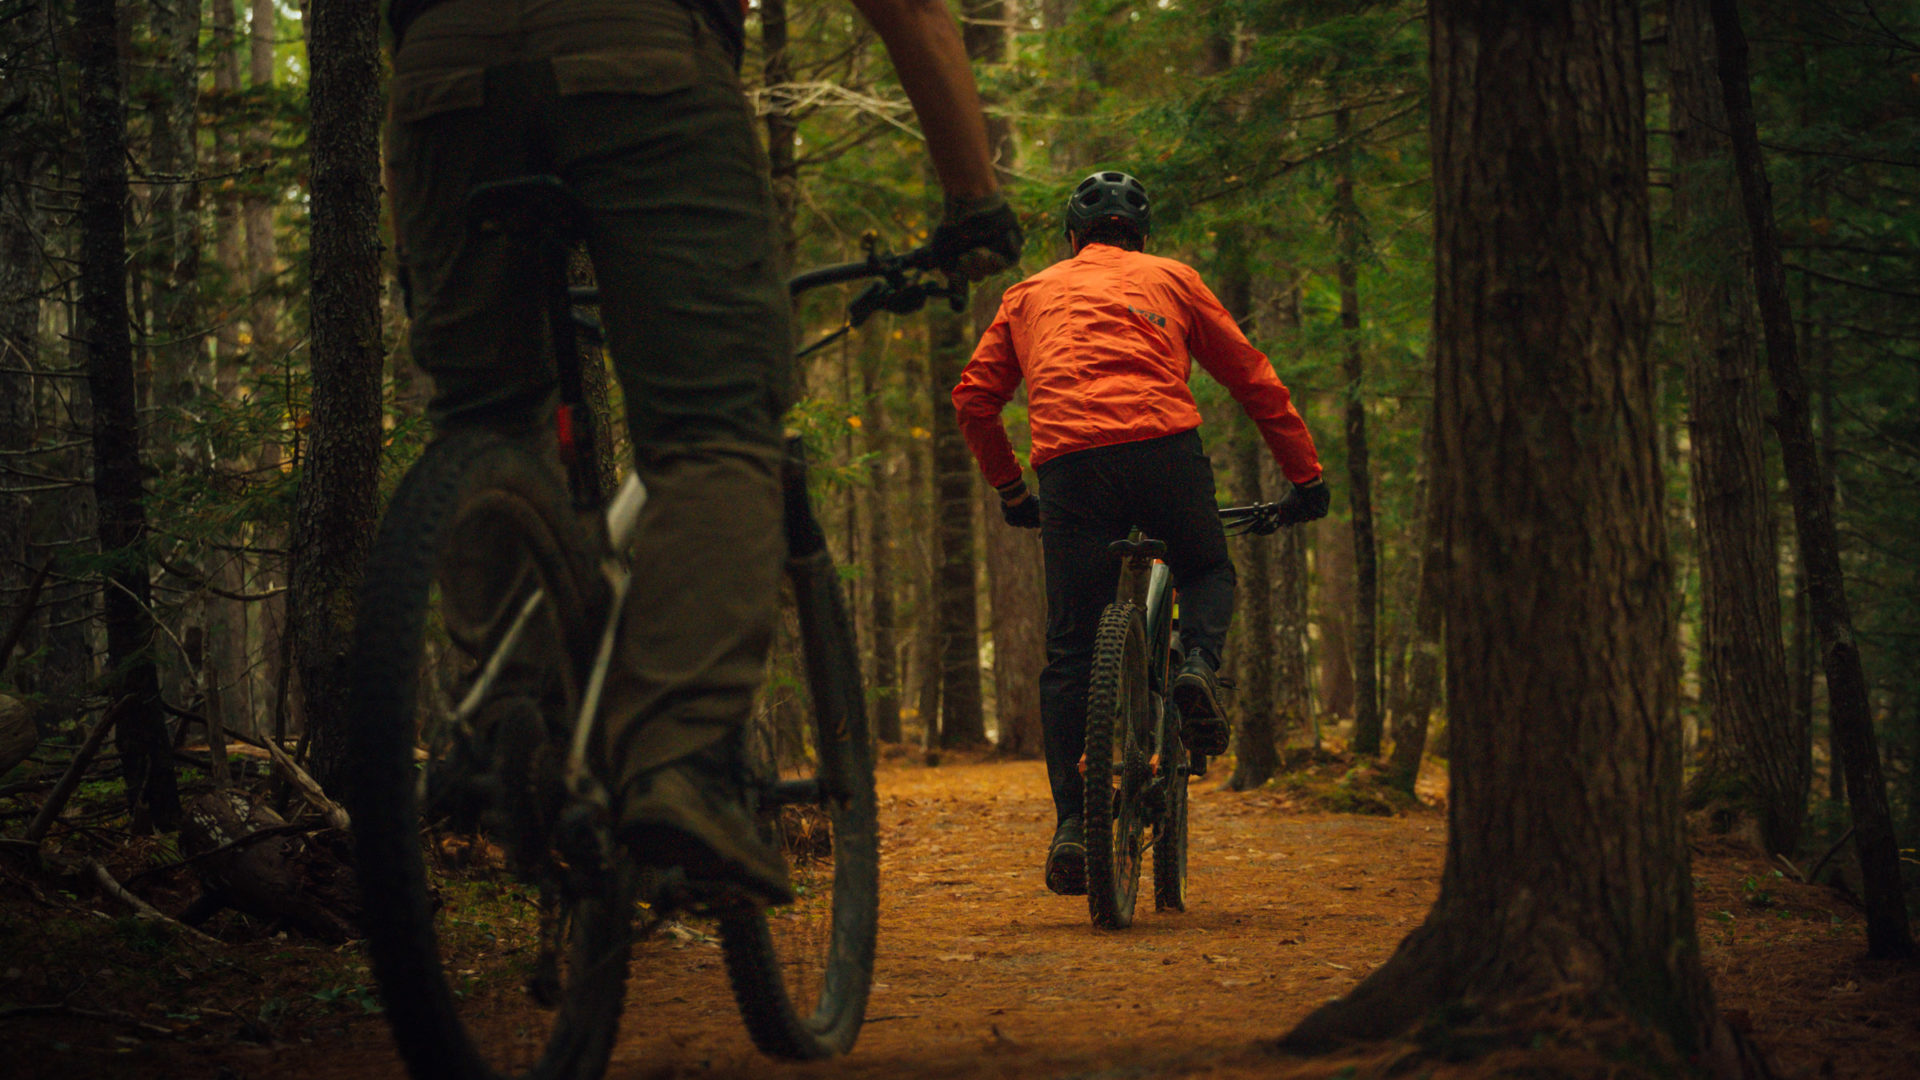 River Ridge Common Mountain Bike Trails in New Germany, NS